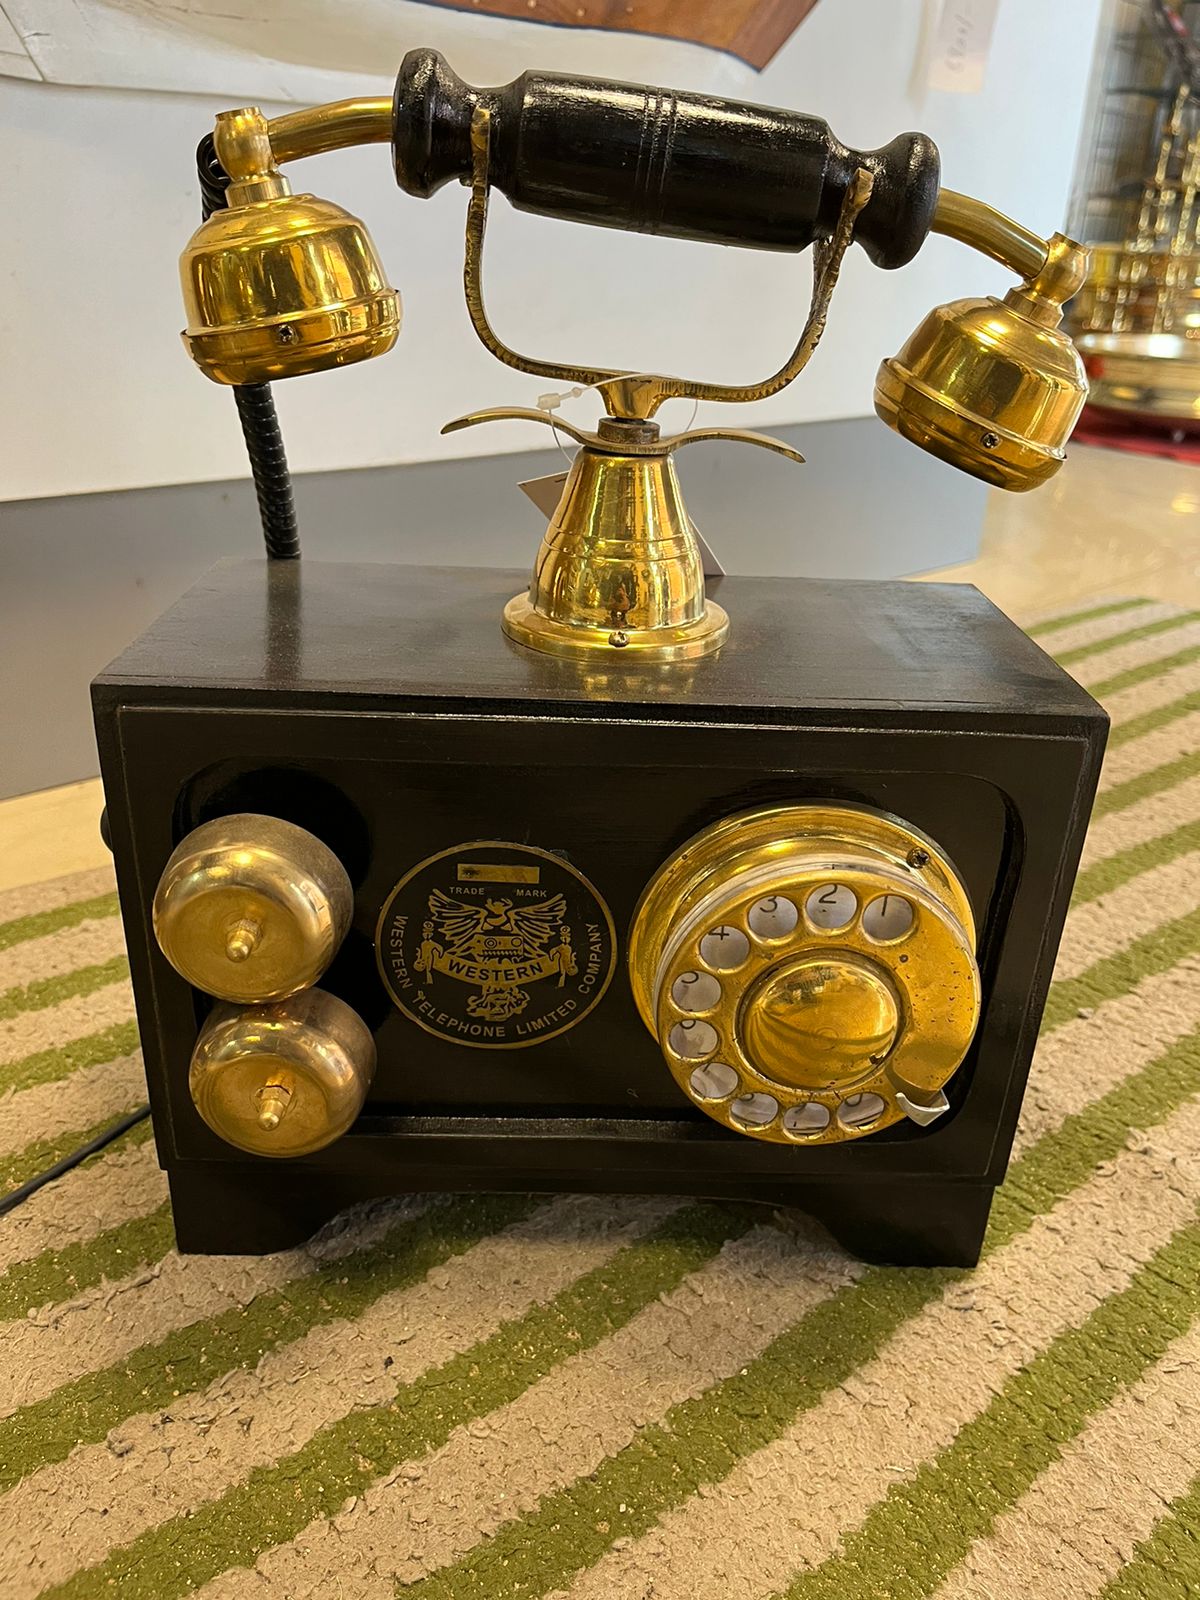 Telephone Nautical Brass Golden Vintage engraved Rotary tabletop desk  working